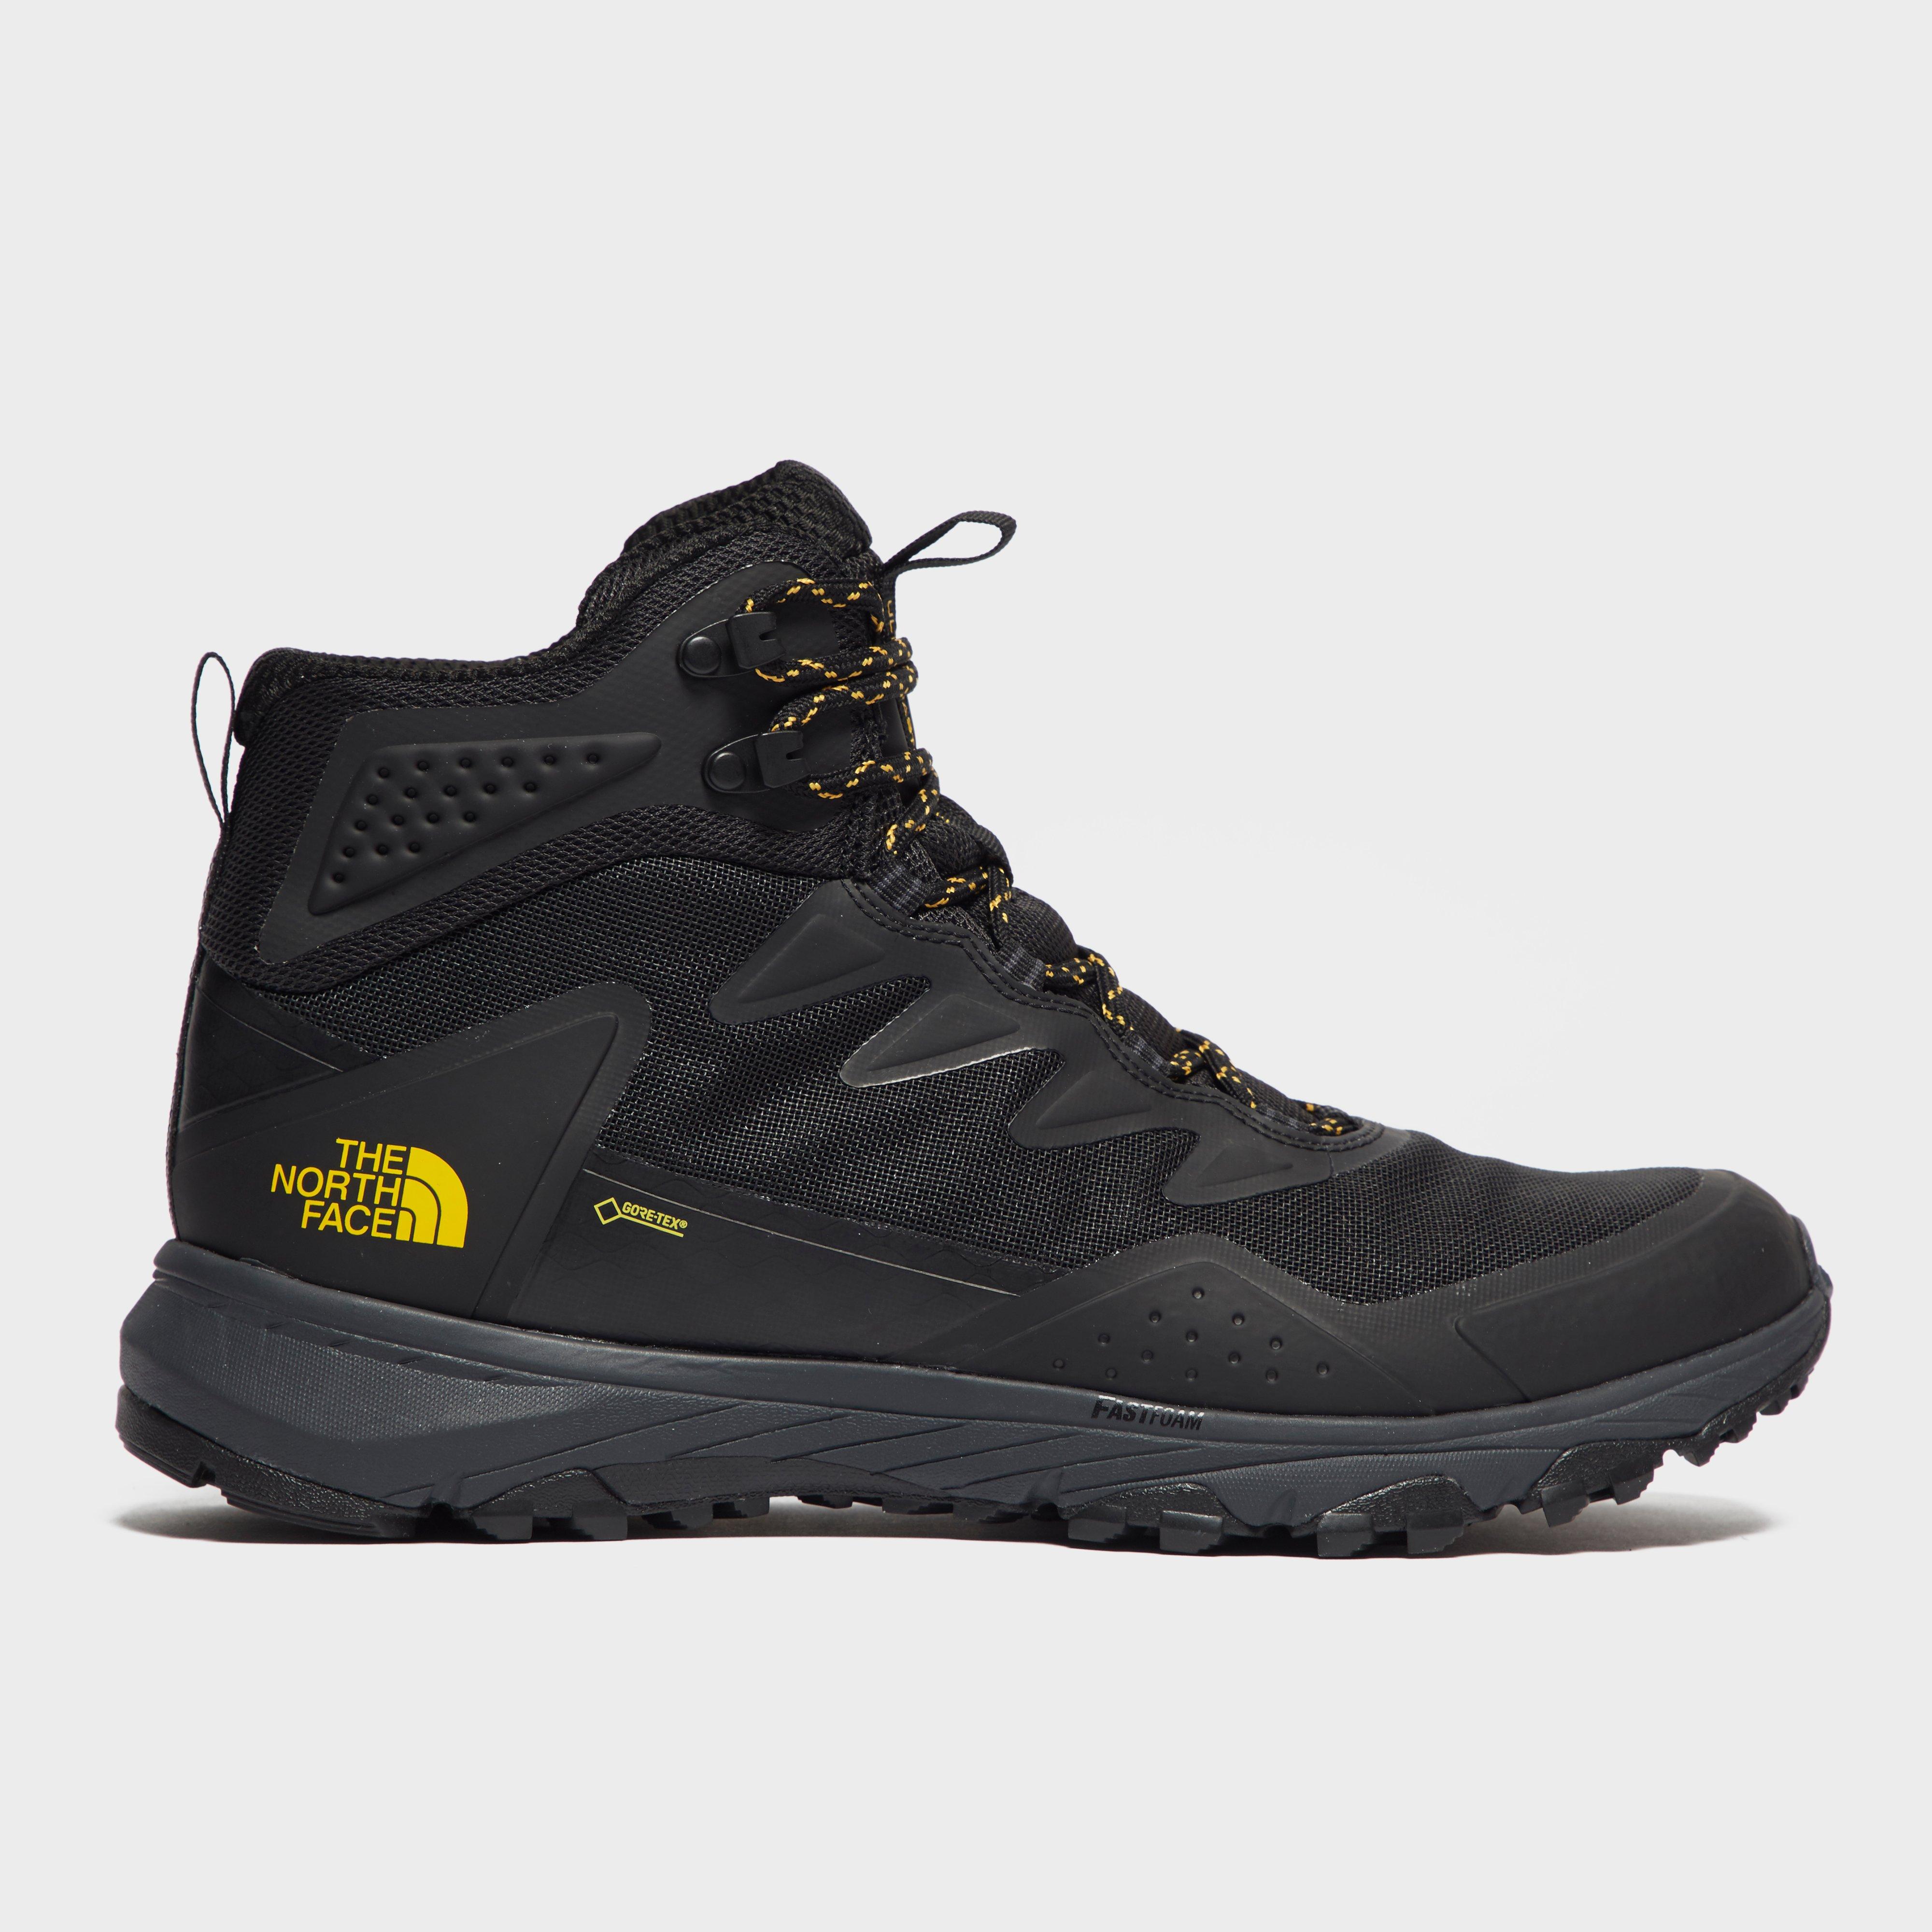 tnf hiking boots